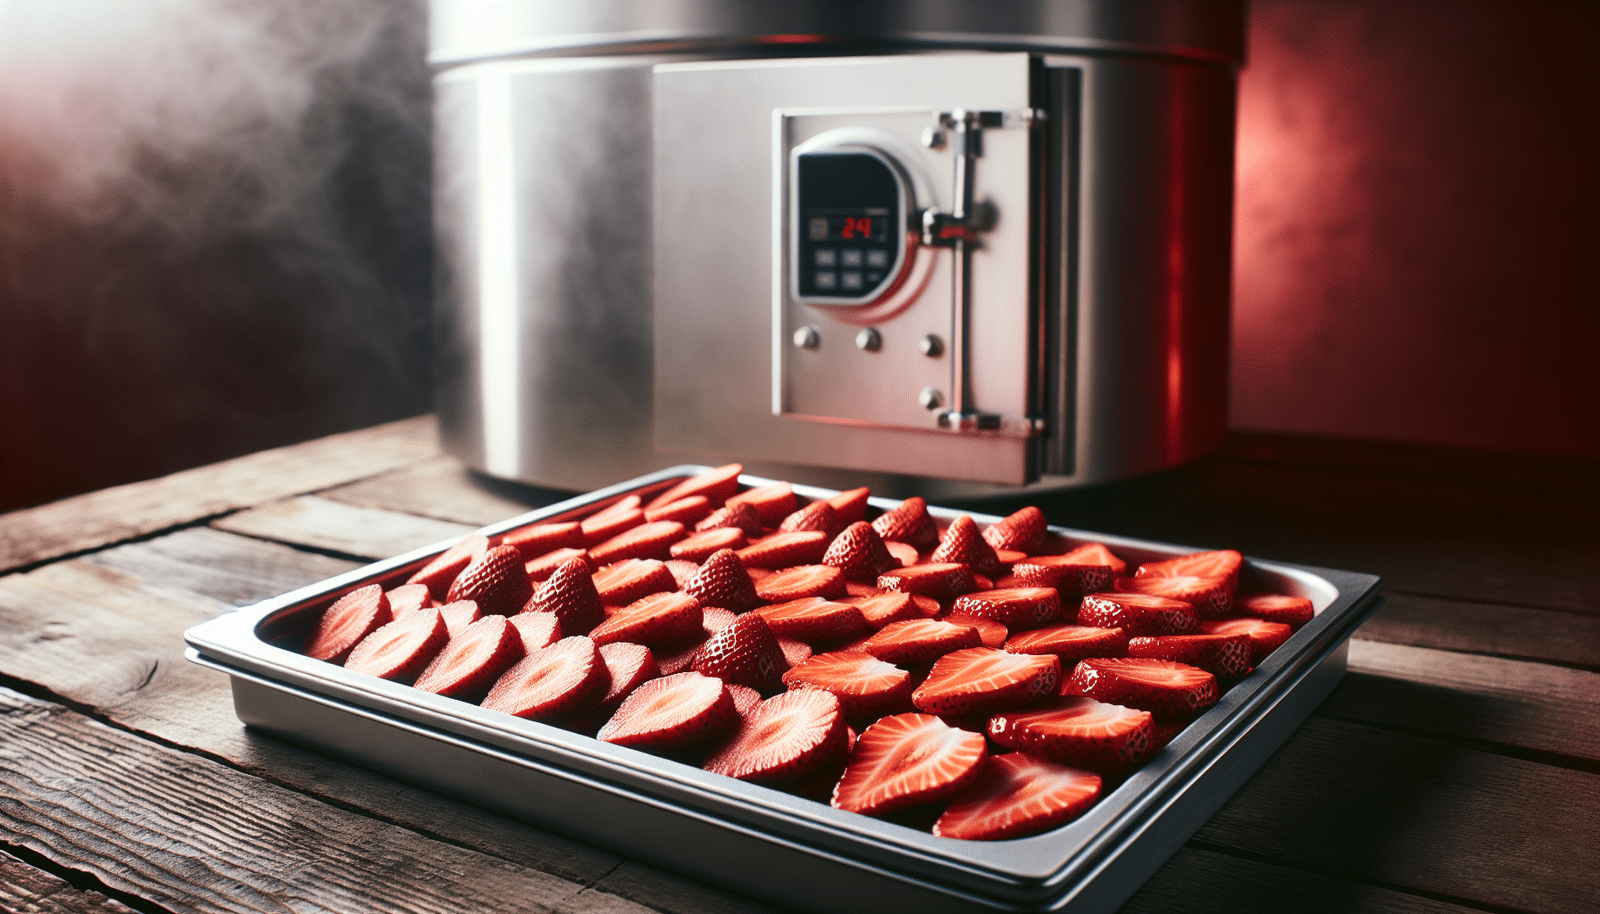 Uniformly sliced strawberries on a freeze dryer tray